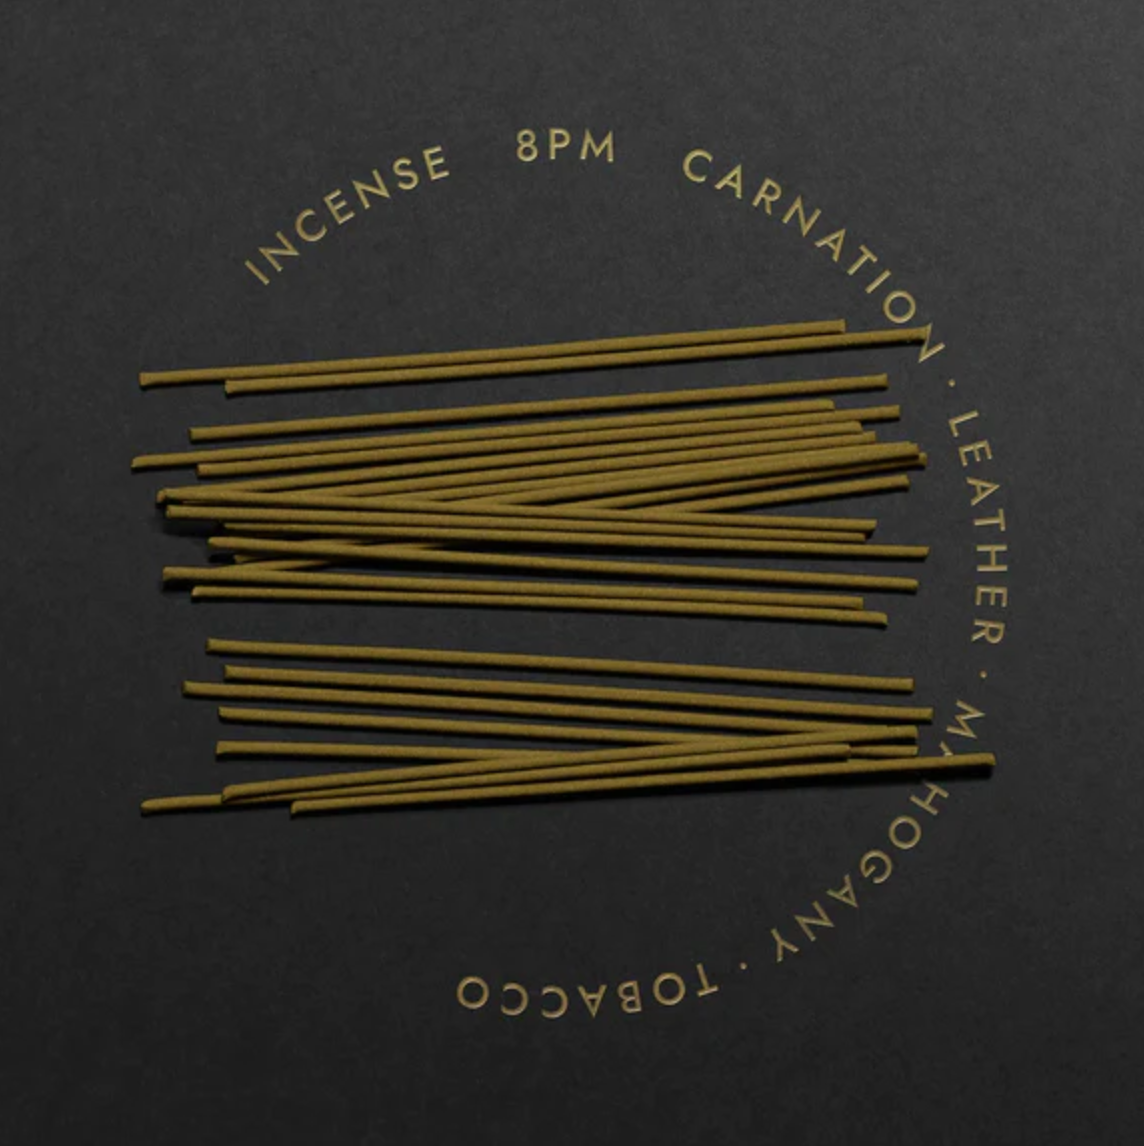 8pm Incense by Cinnamon Projects